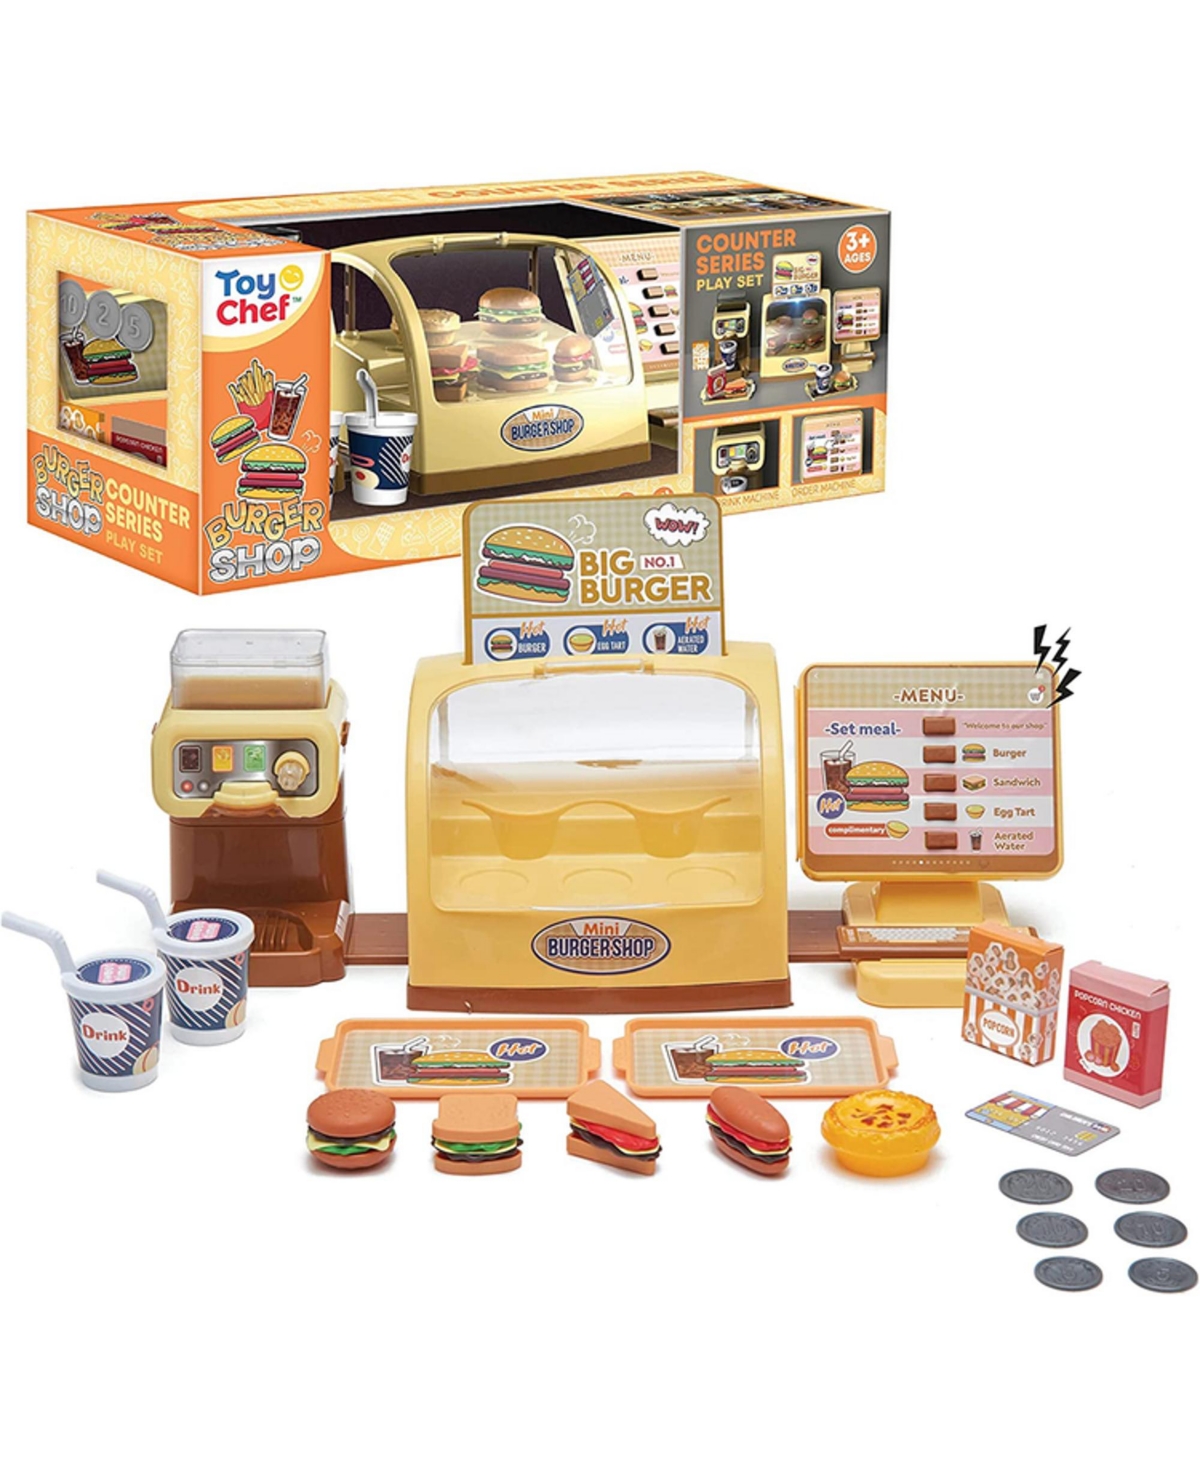 Toy Chef Counter Top Burger Station Set In Multi